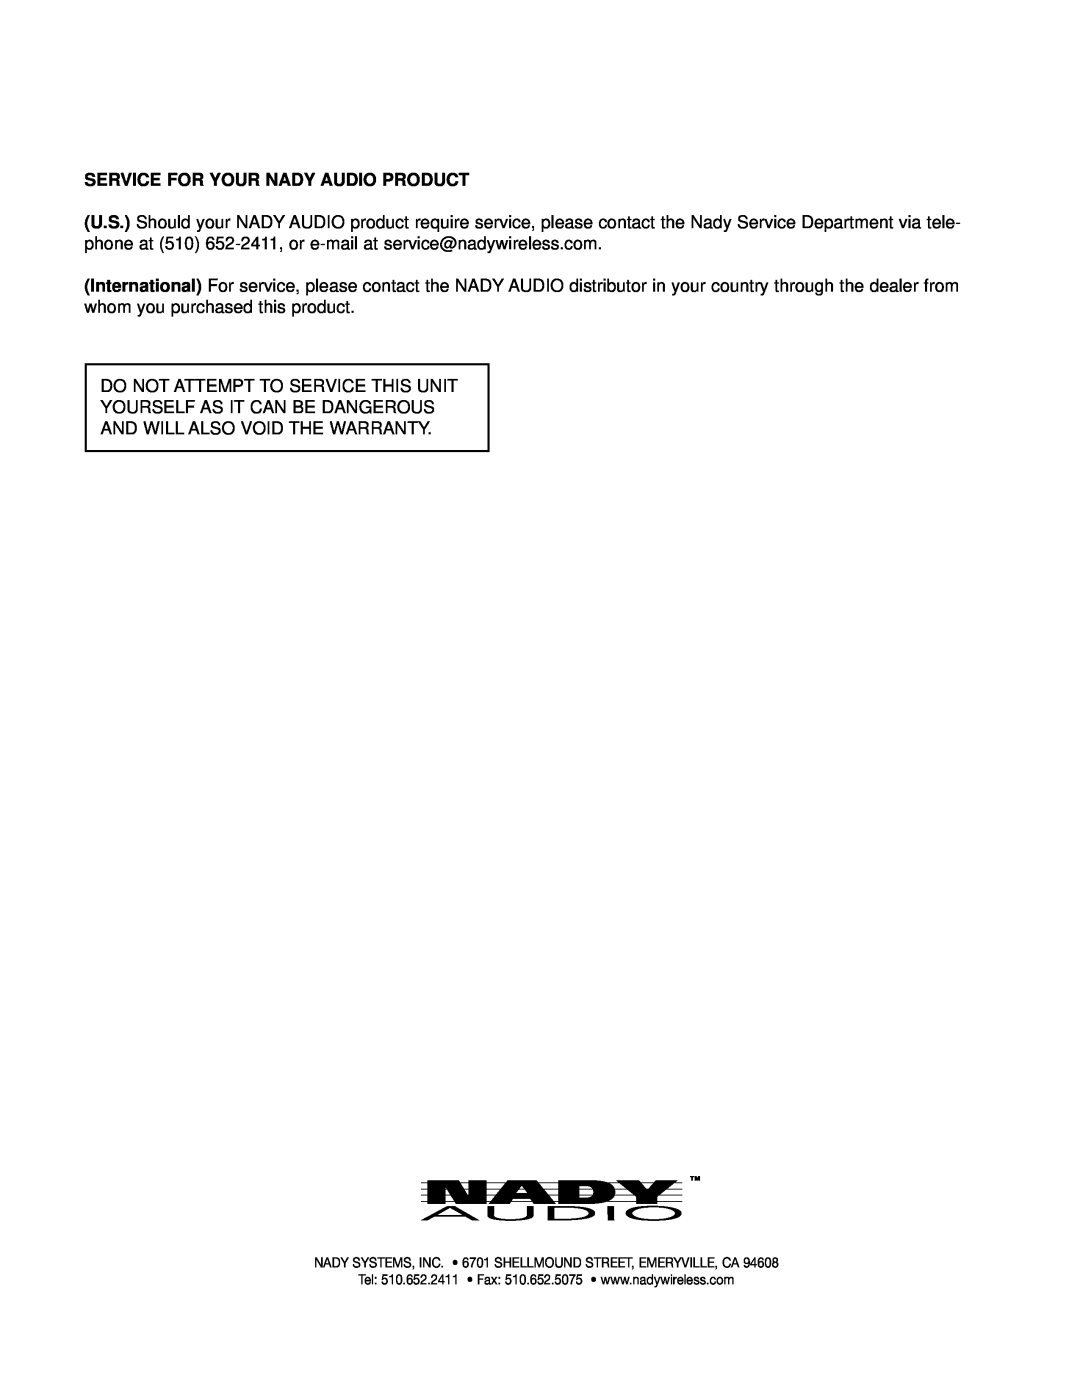 Nady Systems MXE-1212 owner manual Service For Your Nady Audio Product 